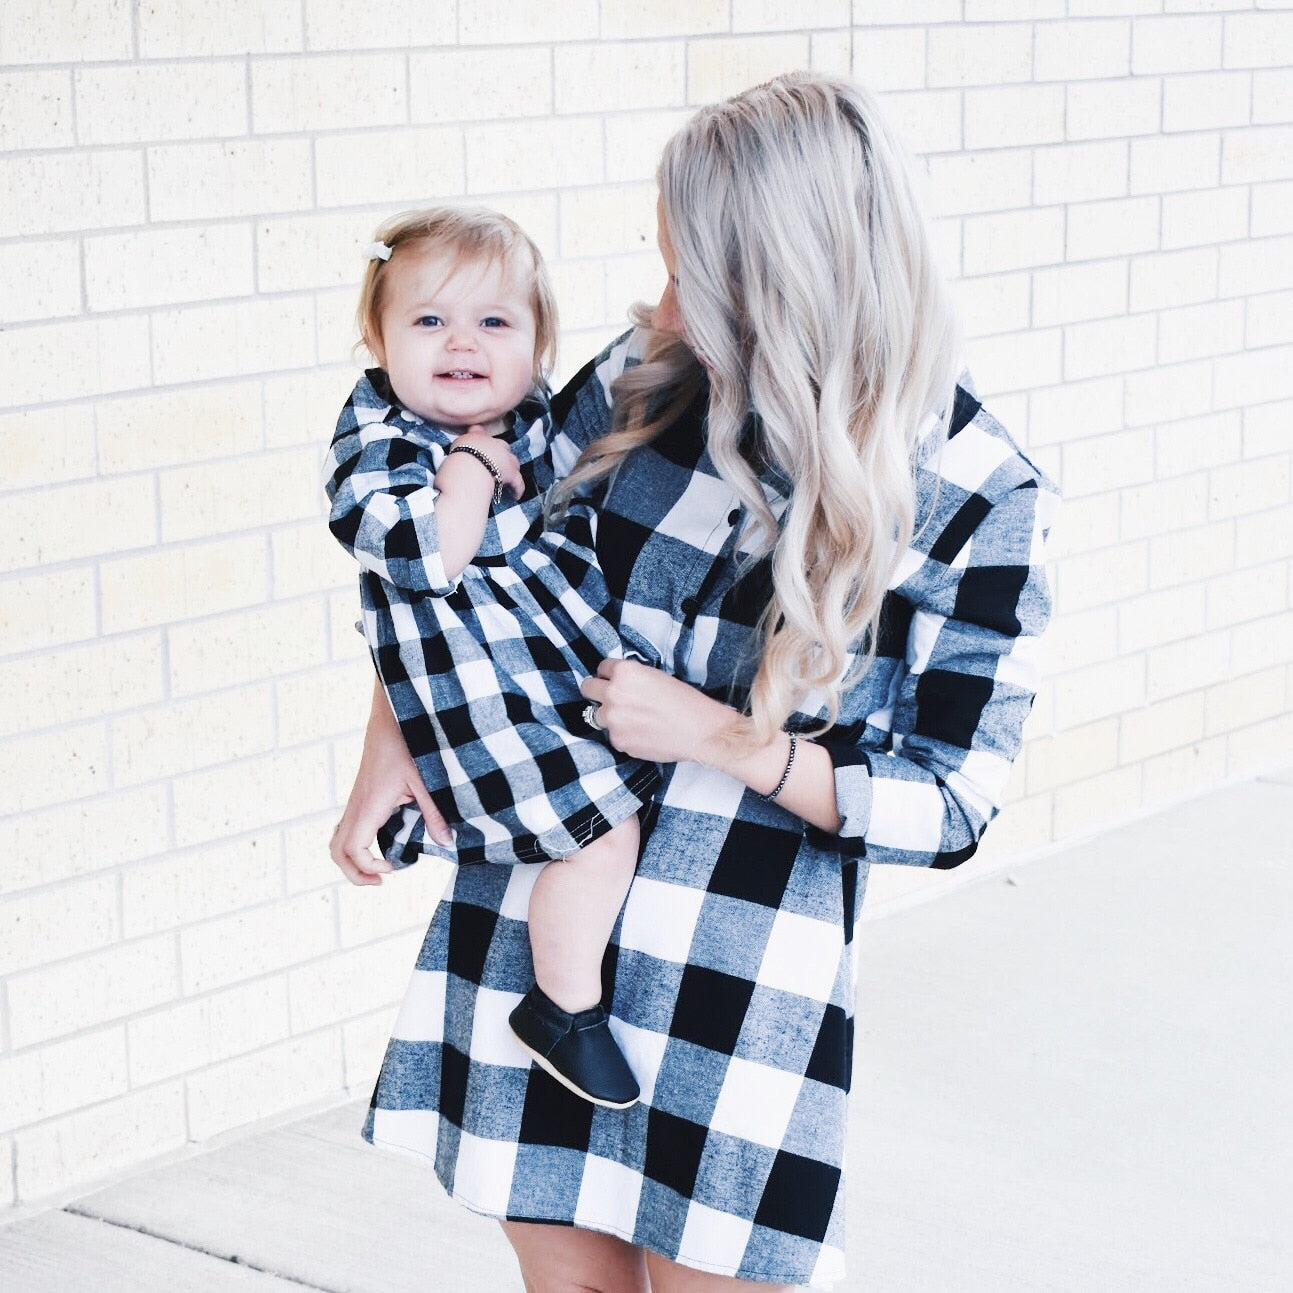 Family Matching Mother Daughter Striped Dresses